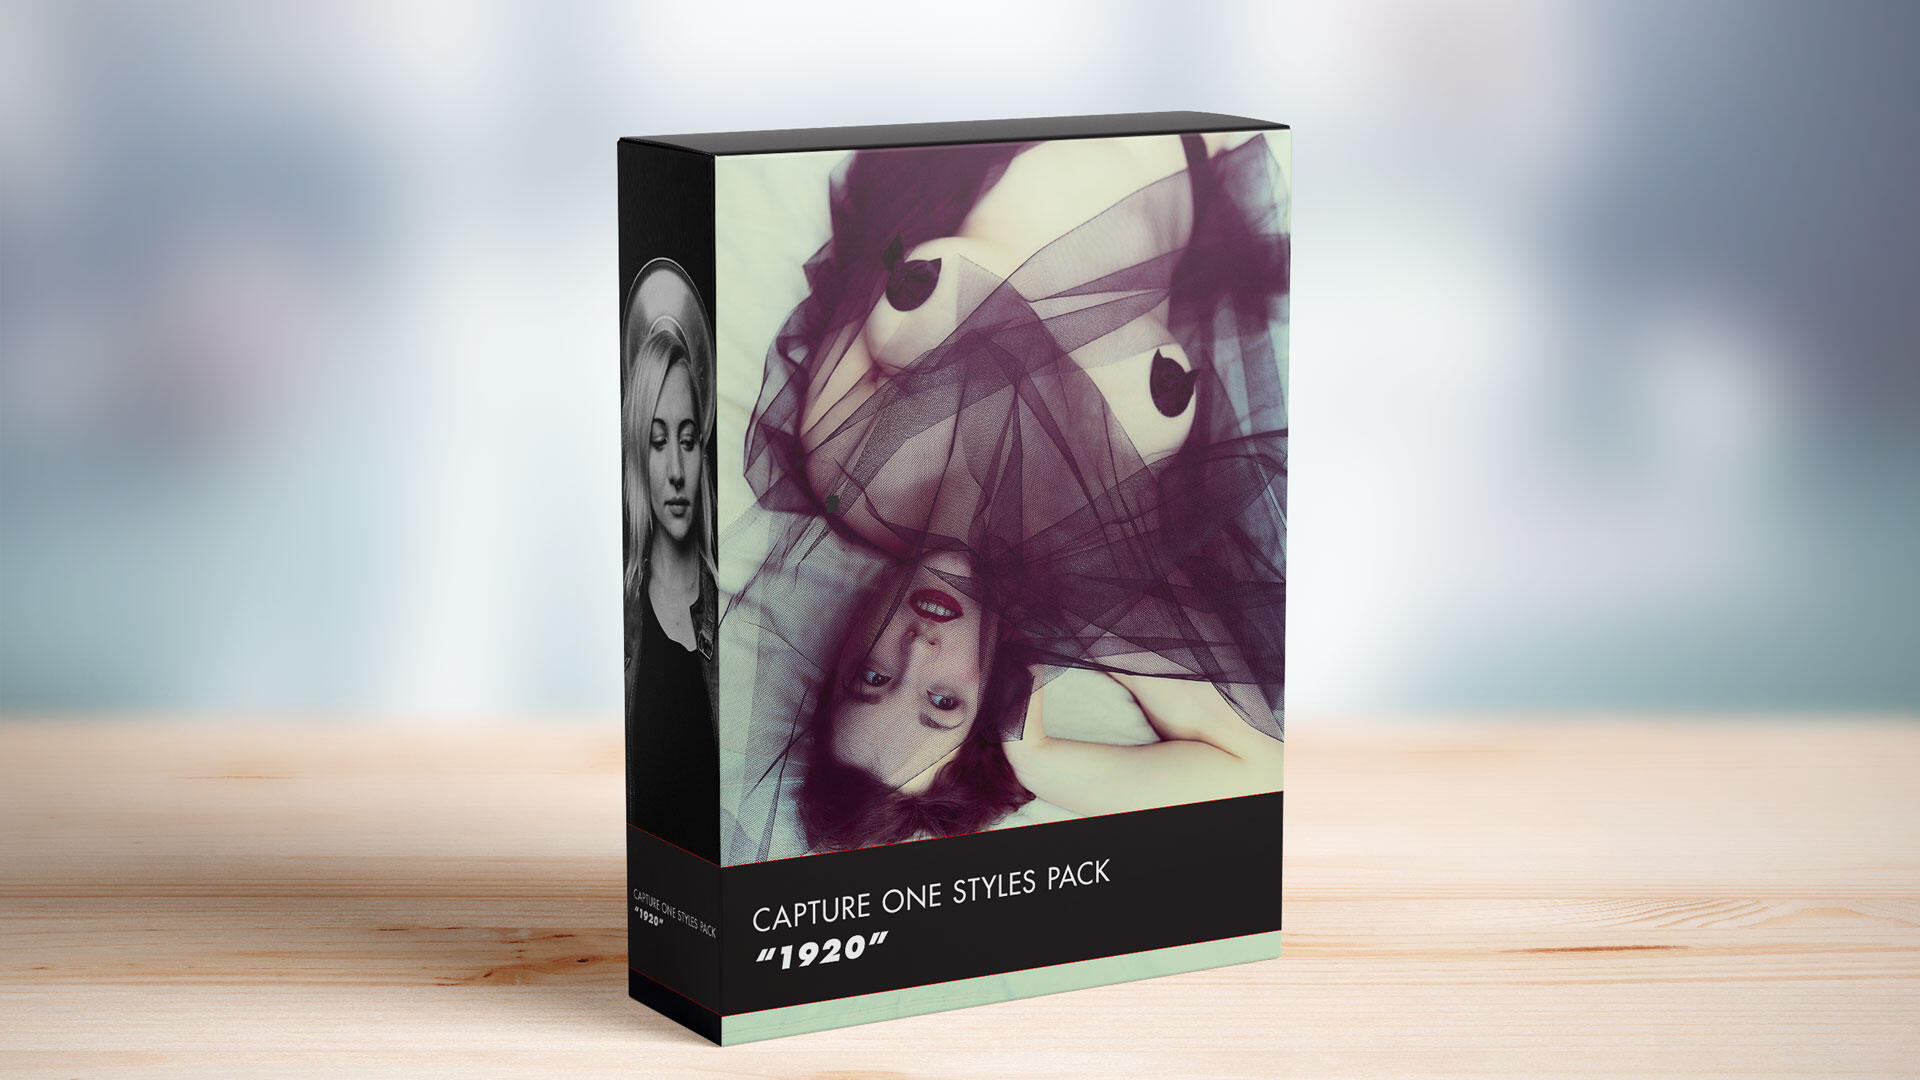 Unique Capture One Styles Pack — Taste of taboo 9